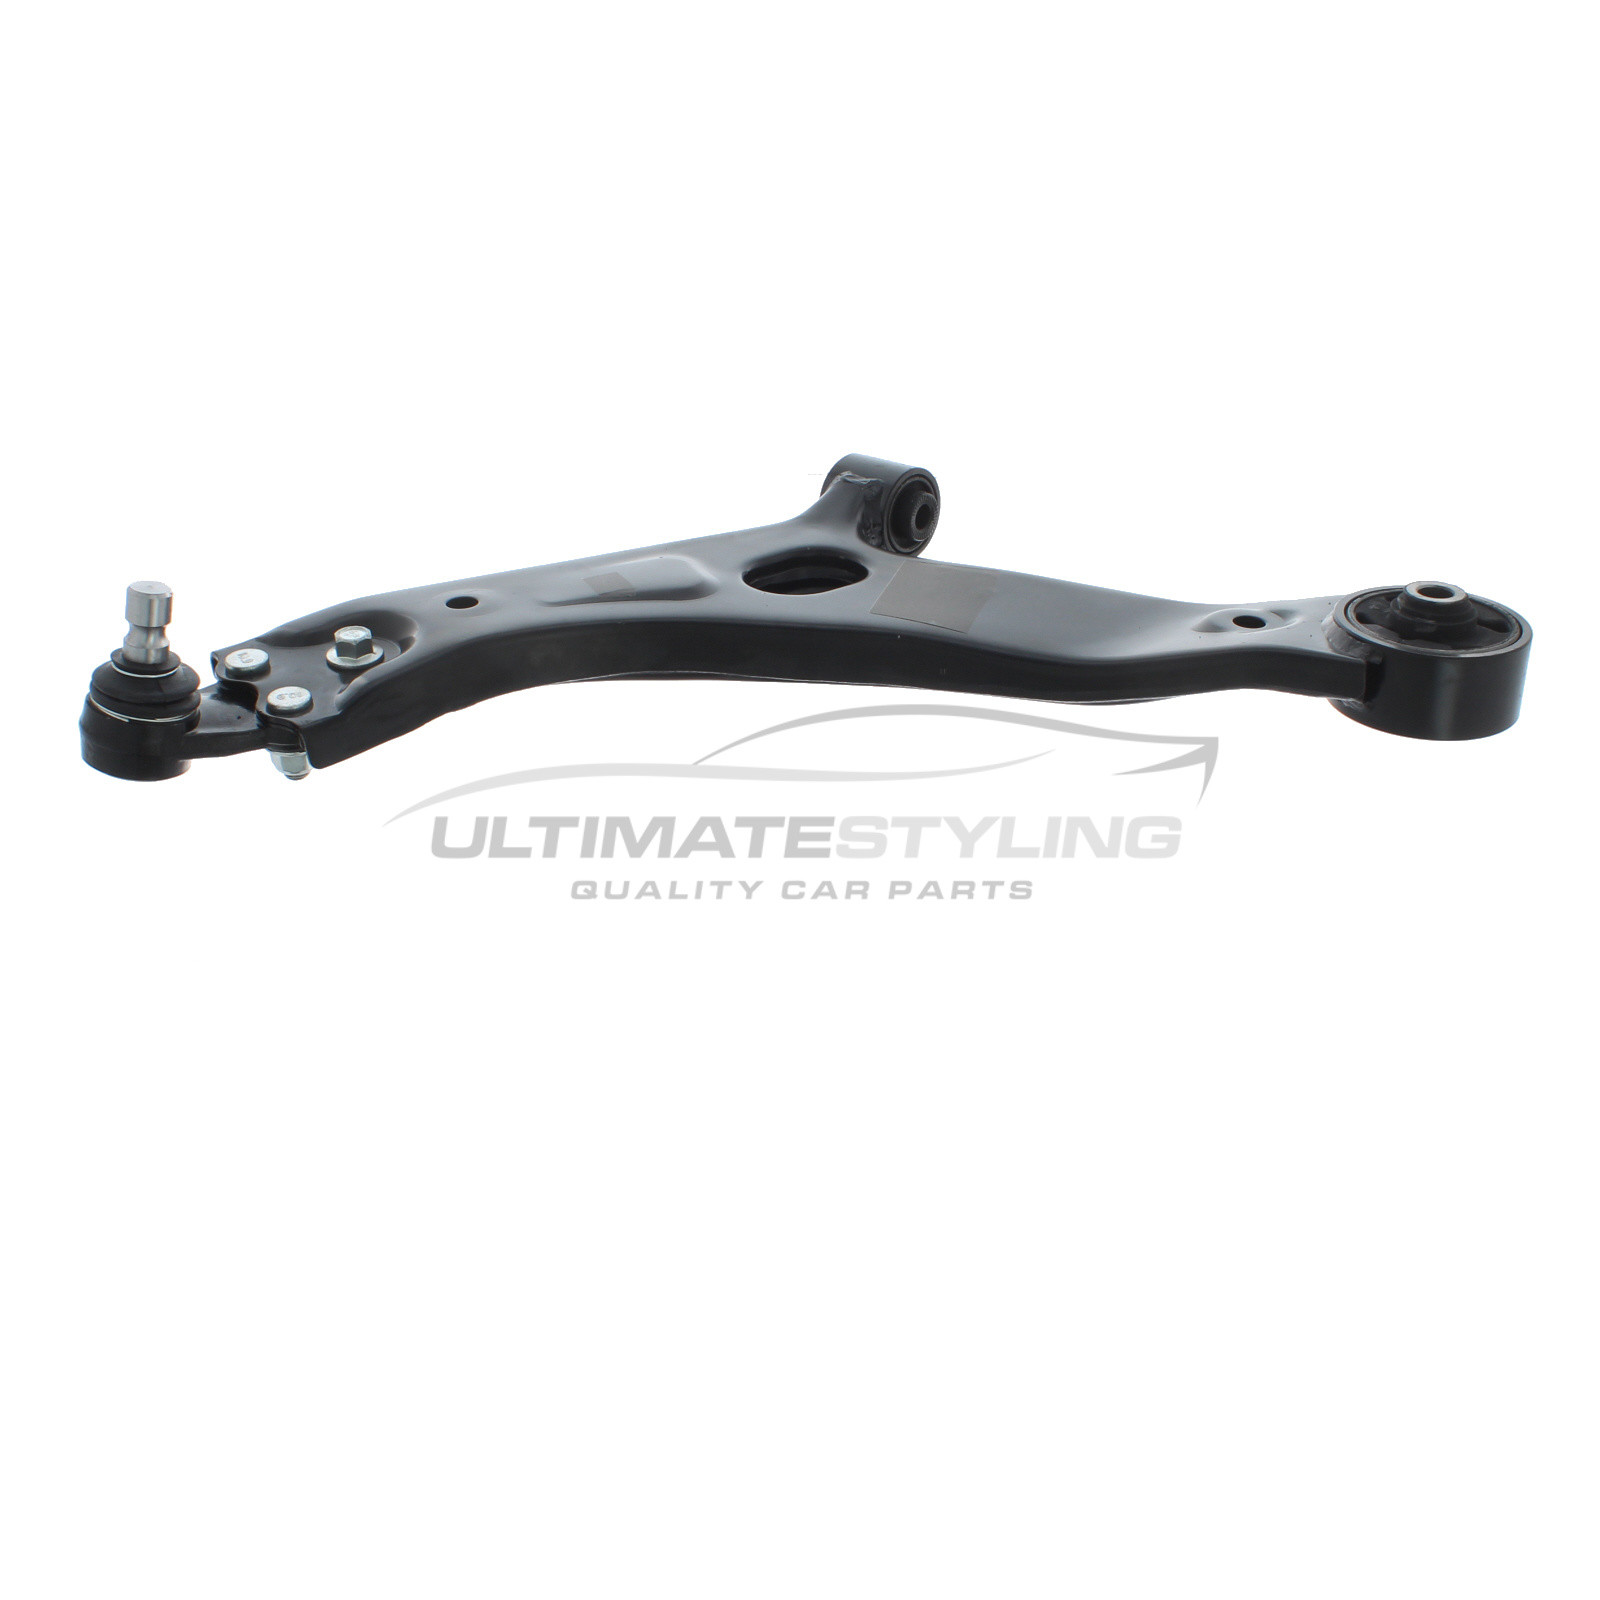 Hyundai ix35 2010-2010, Kia Sportage 2010-2016 Front Lower Suspension Arm (Steel) Including Ball Joint and Rear Bush Passenger Side (LH)